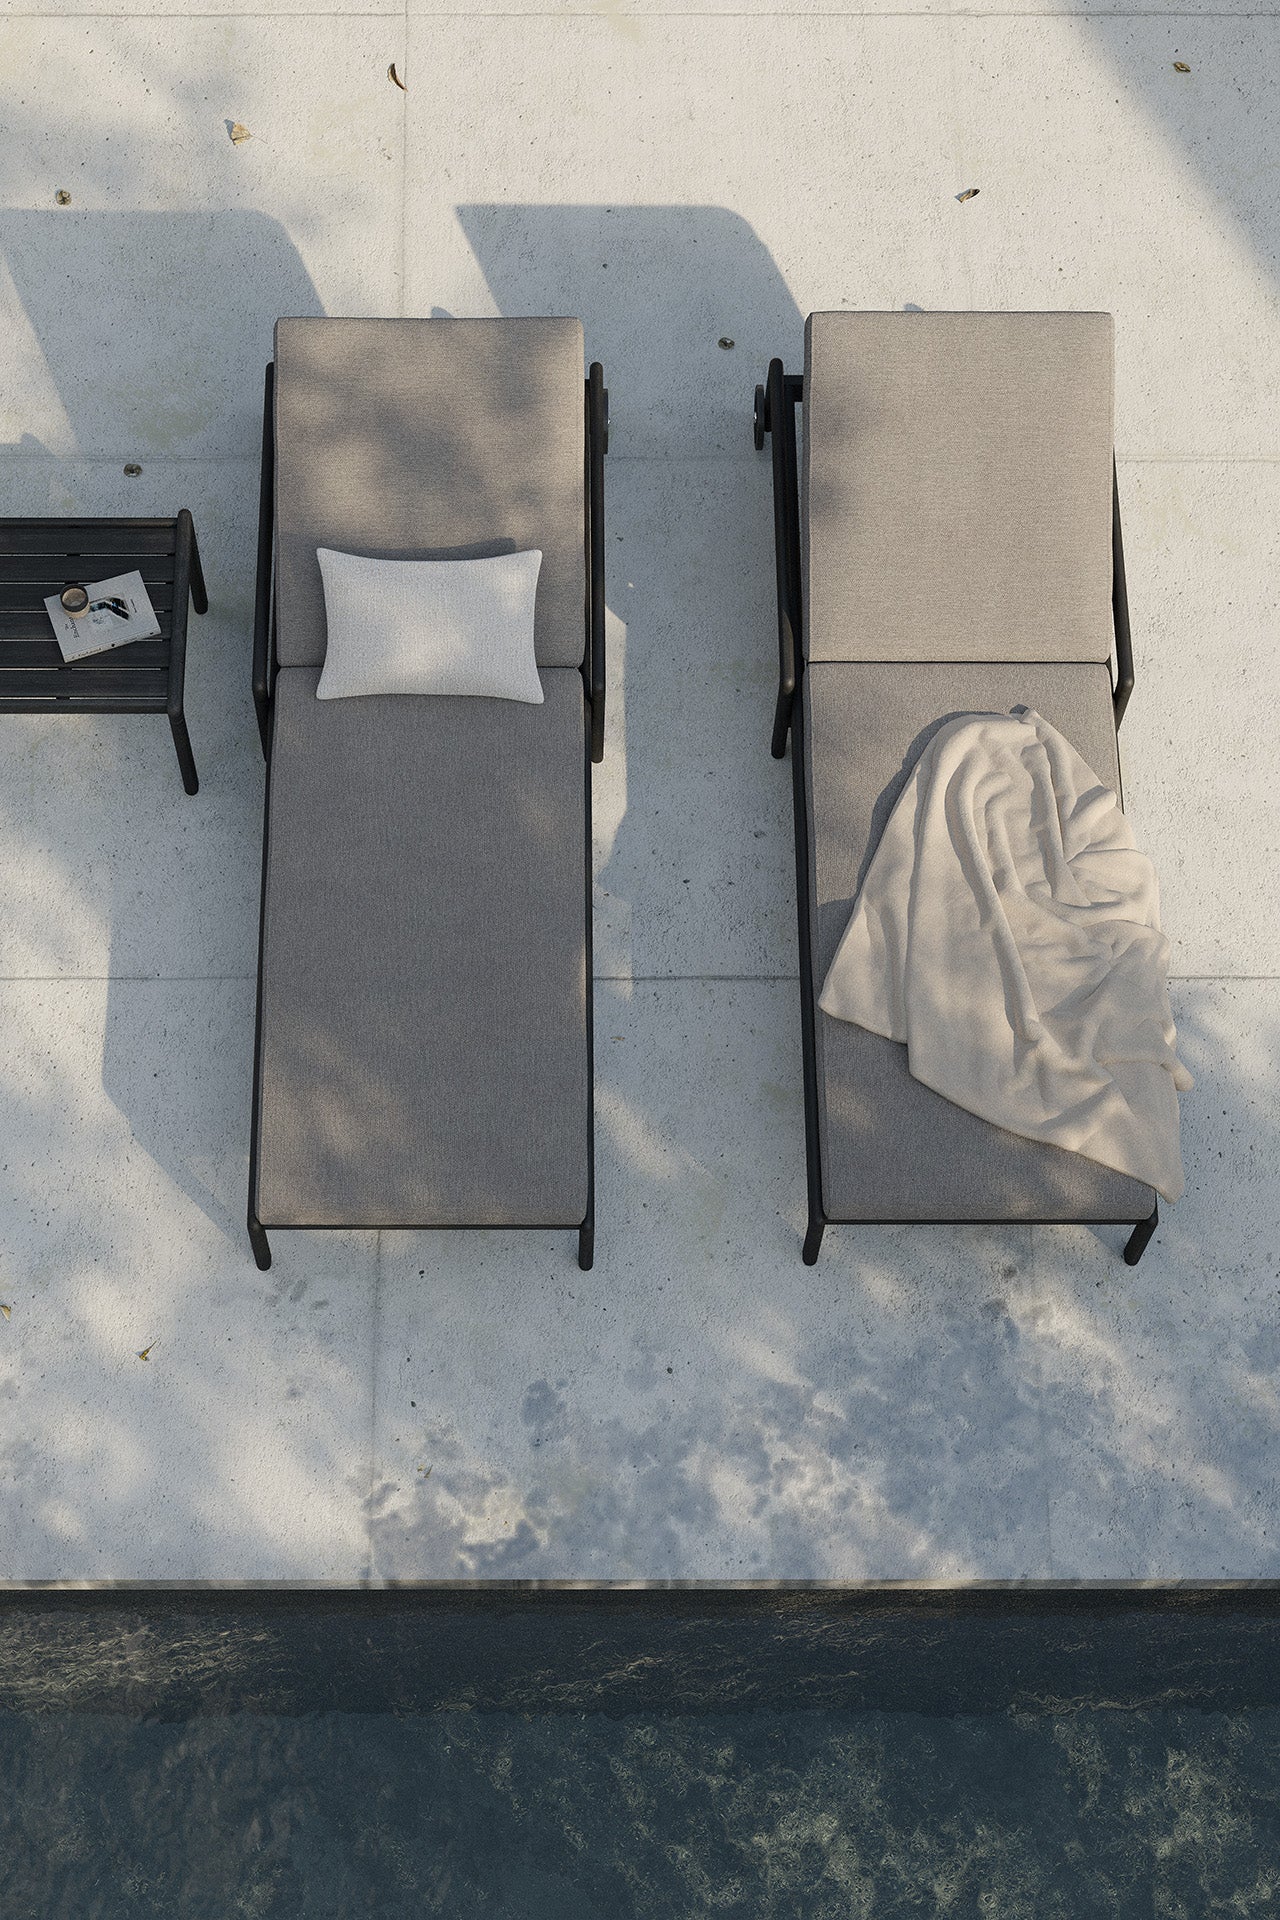 Jack outdoor boucle cushion in white on ethnicraft black lounger nexto to pool with side table and towel